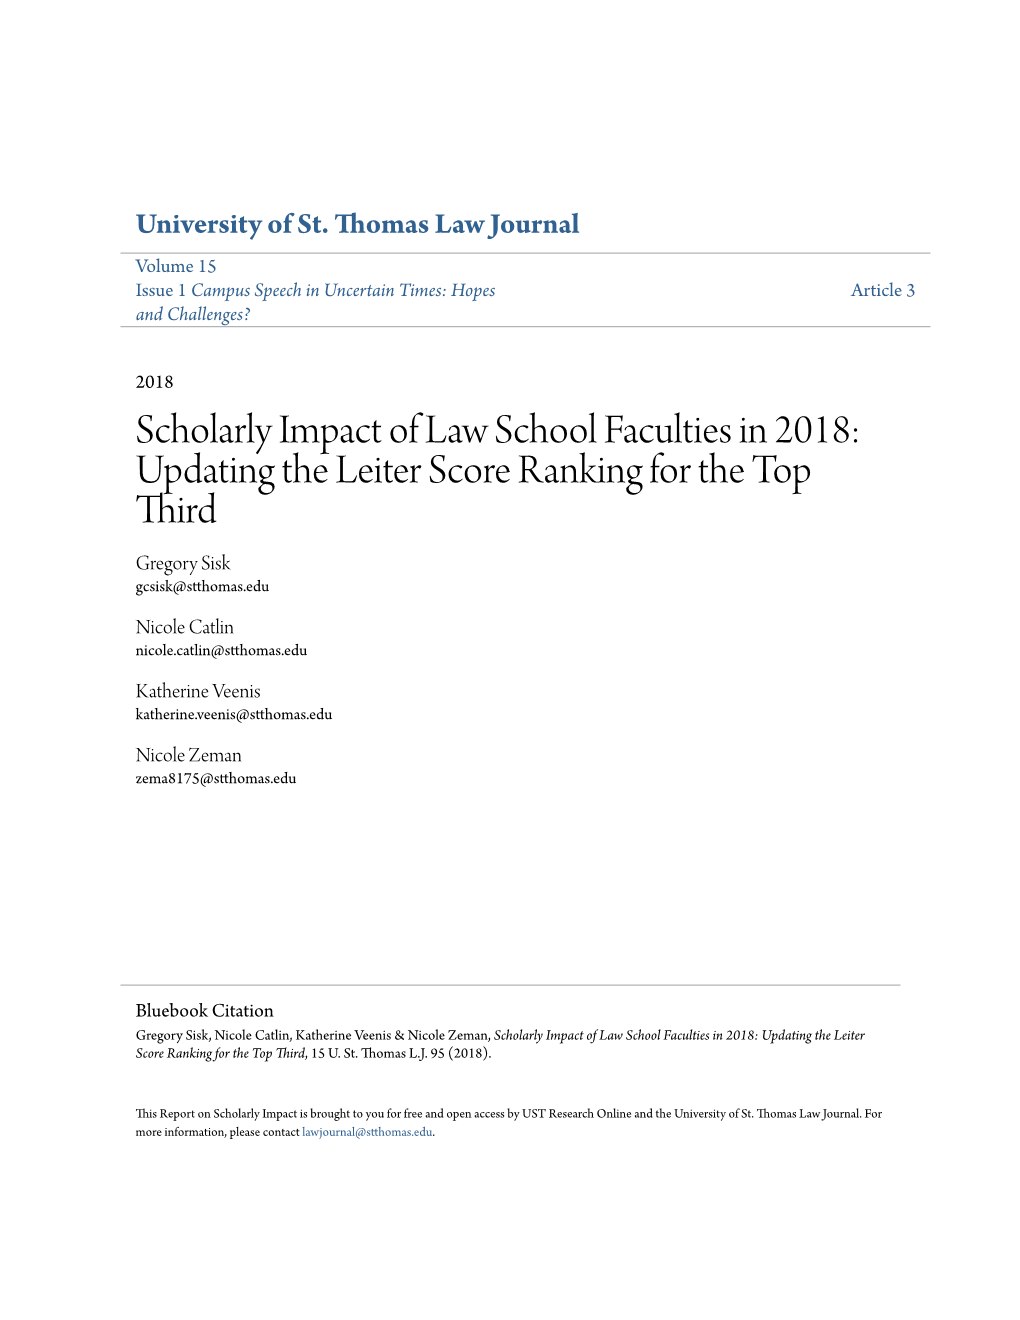 Scholarly Impact of Law School Faculties in 2018: Updating the Leiter Score Ranking for the Top Third Gregory Sisk Gcsisk@Stthomas.Edu